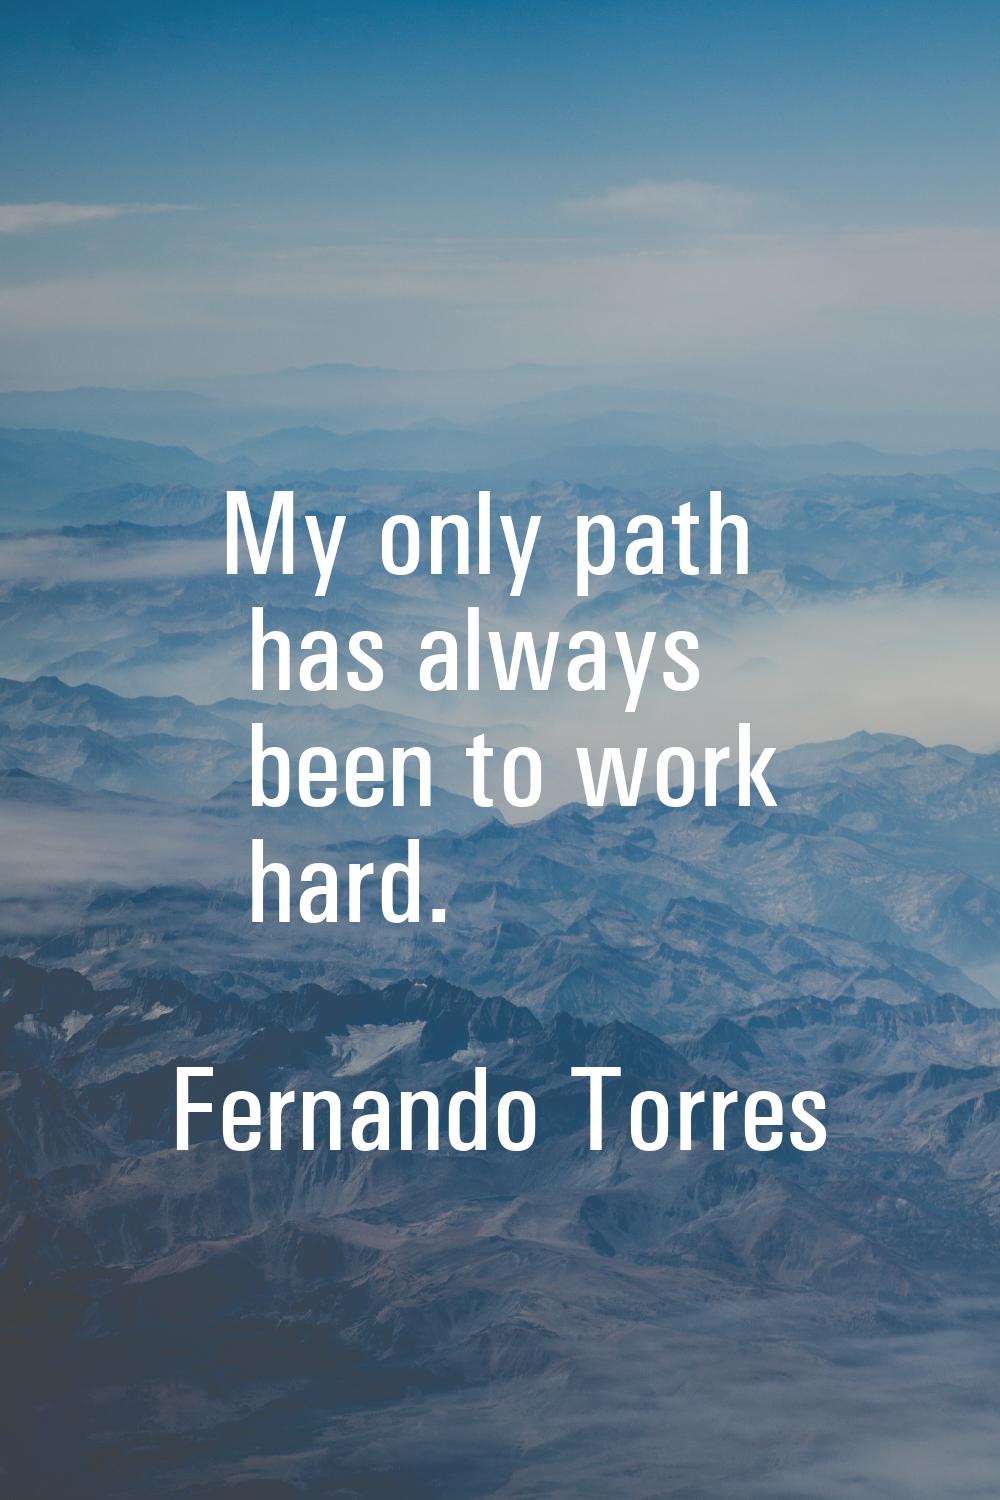 My only path has always been to work hard.